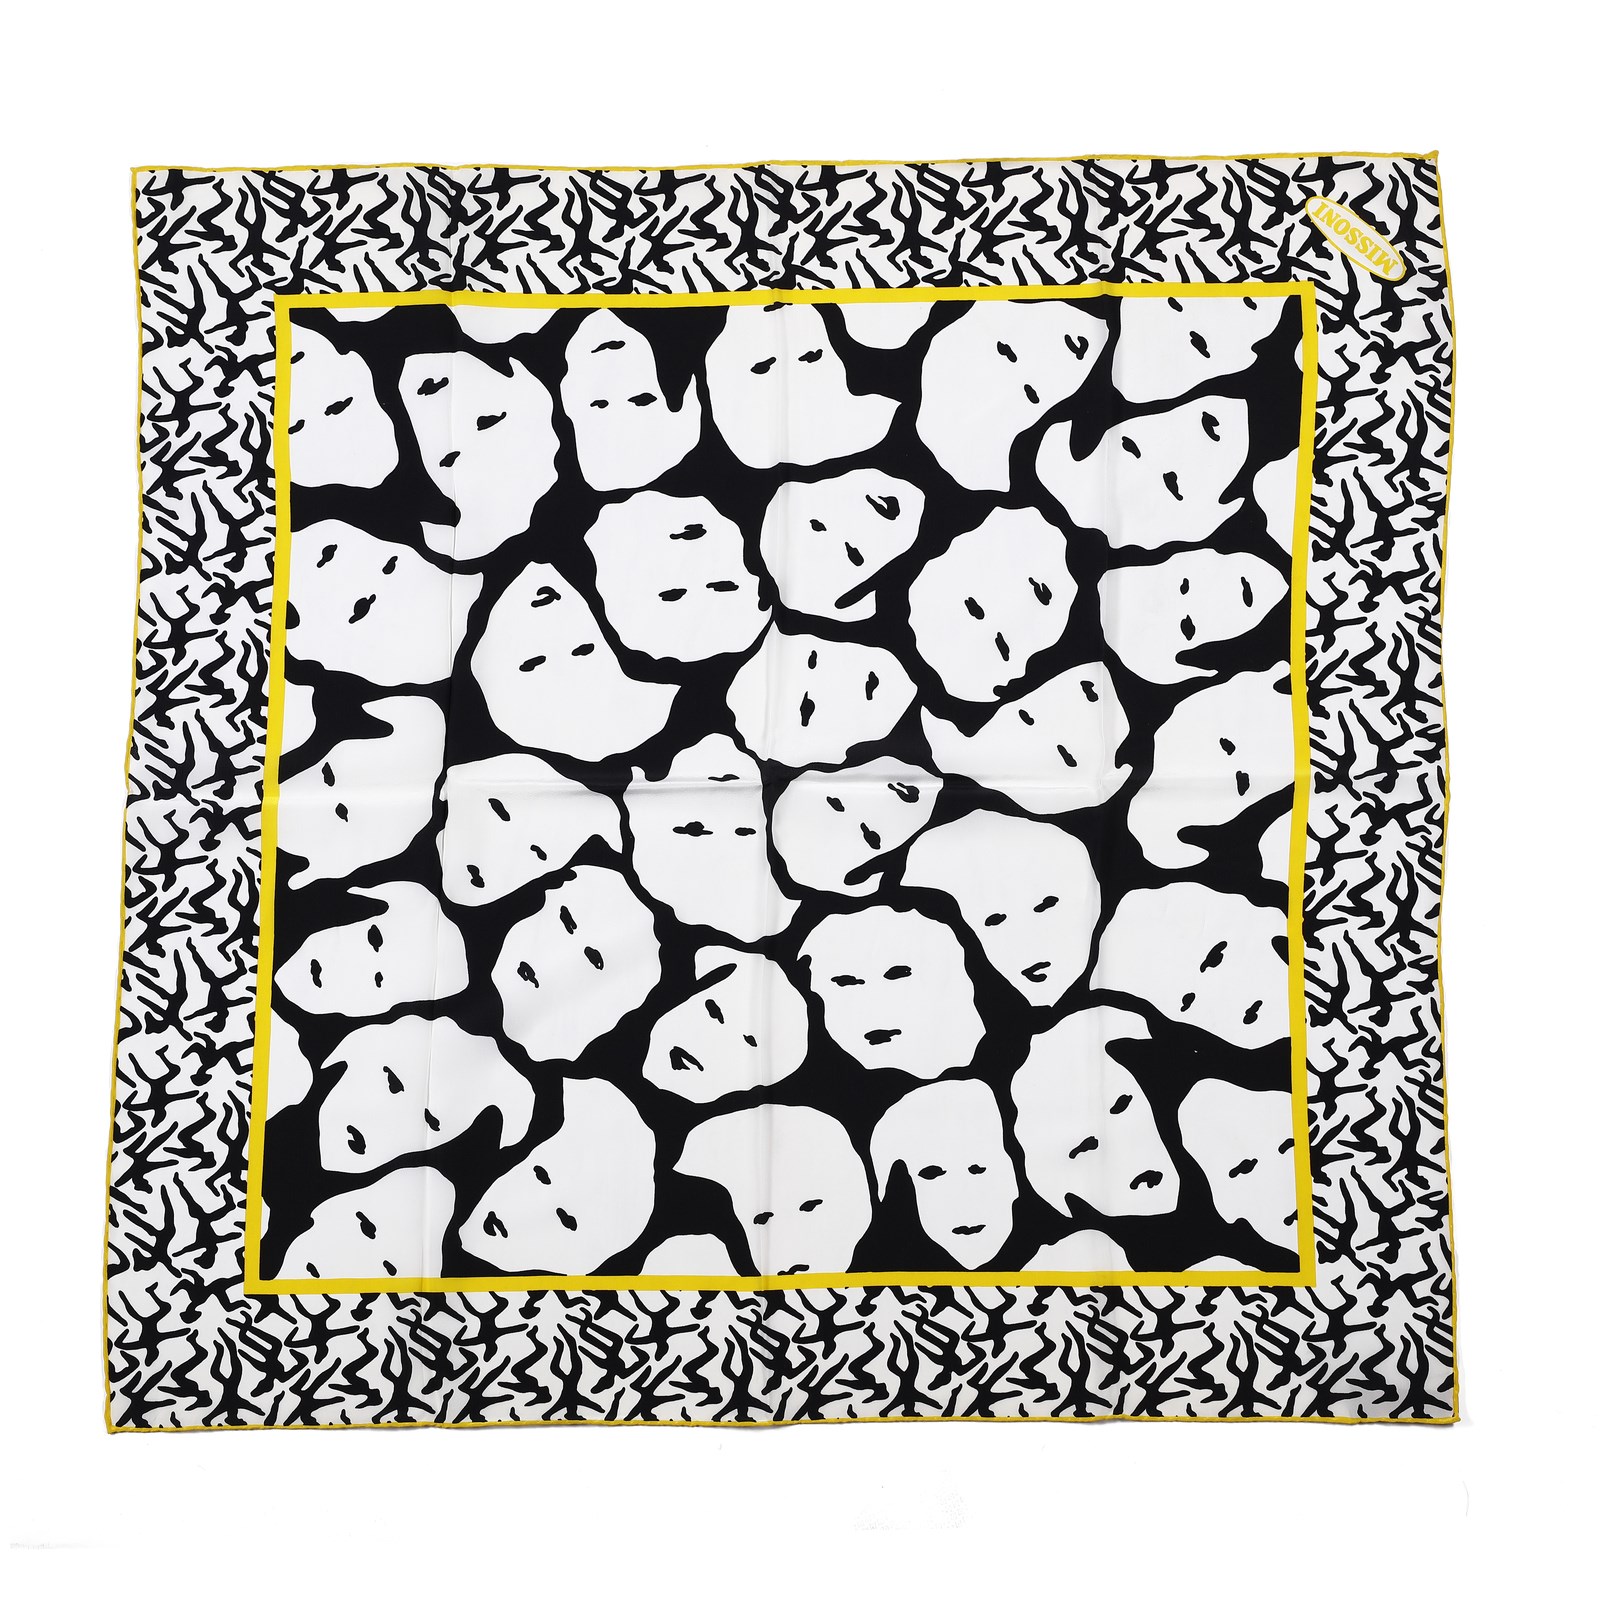 Black silk scarf with faces. (Missoni )